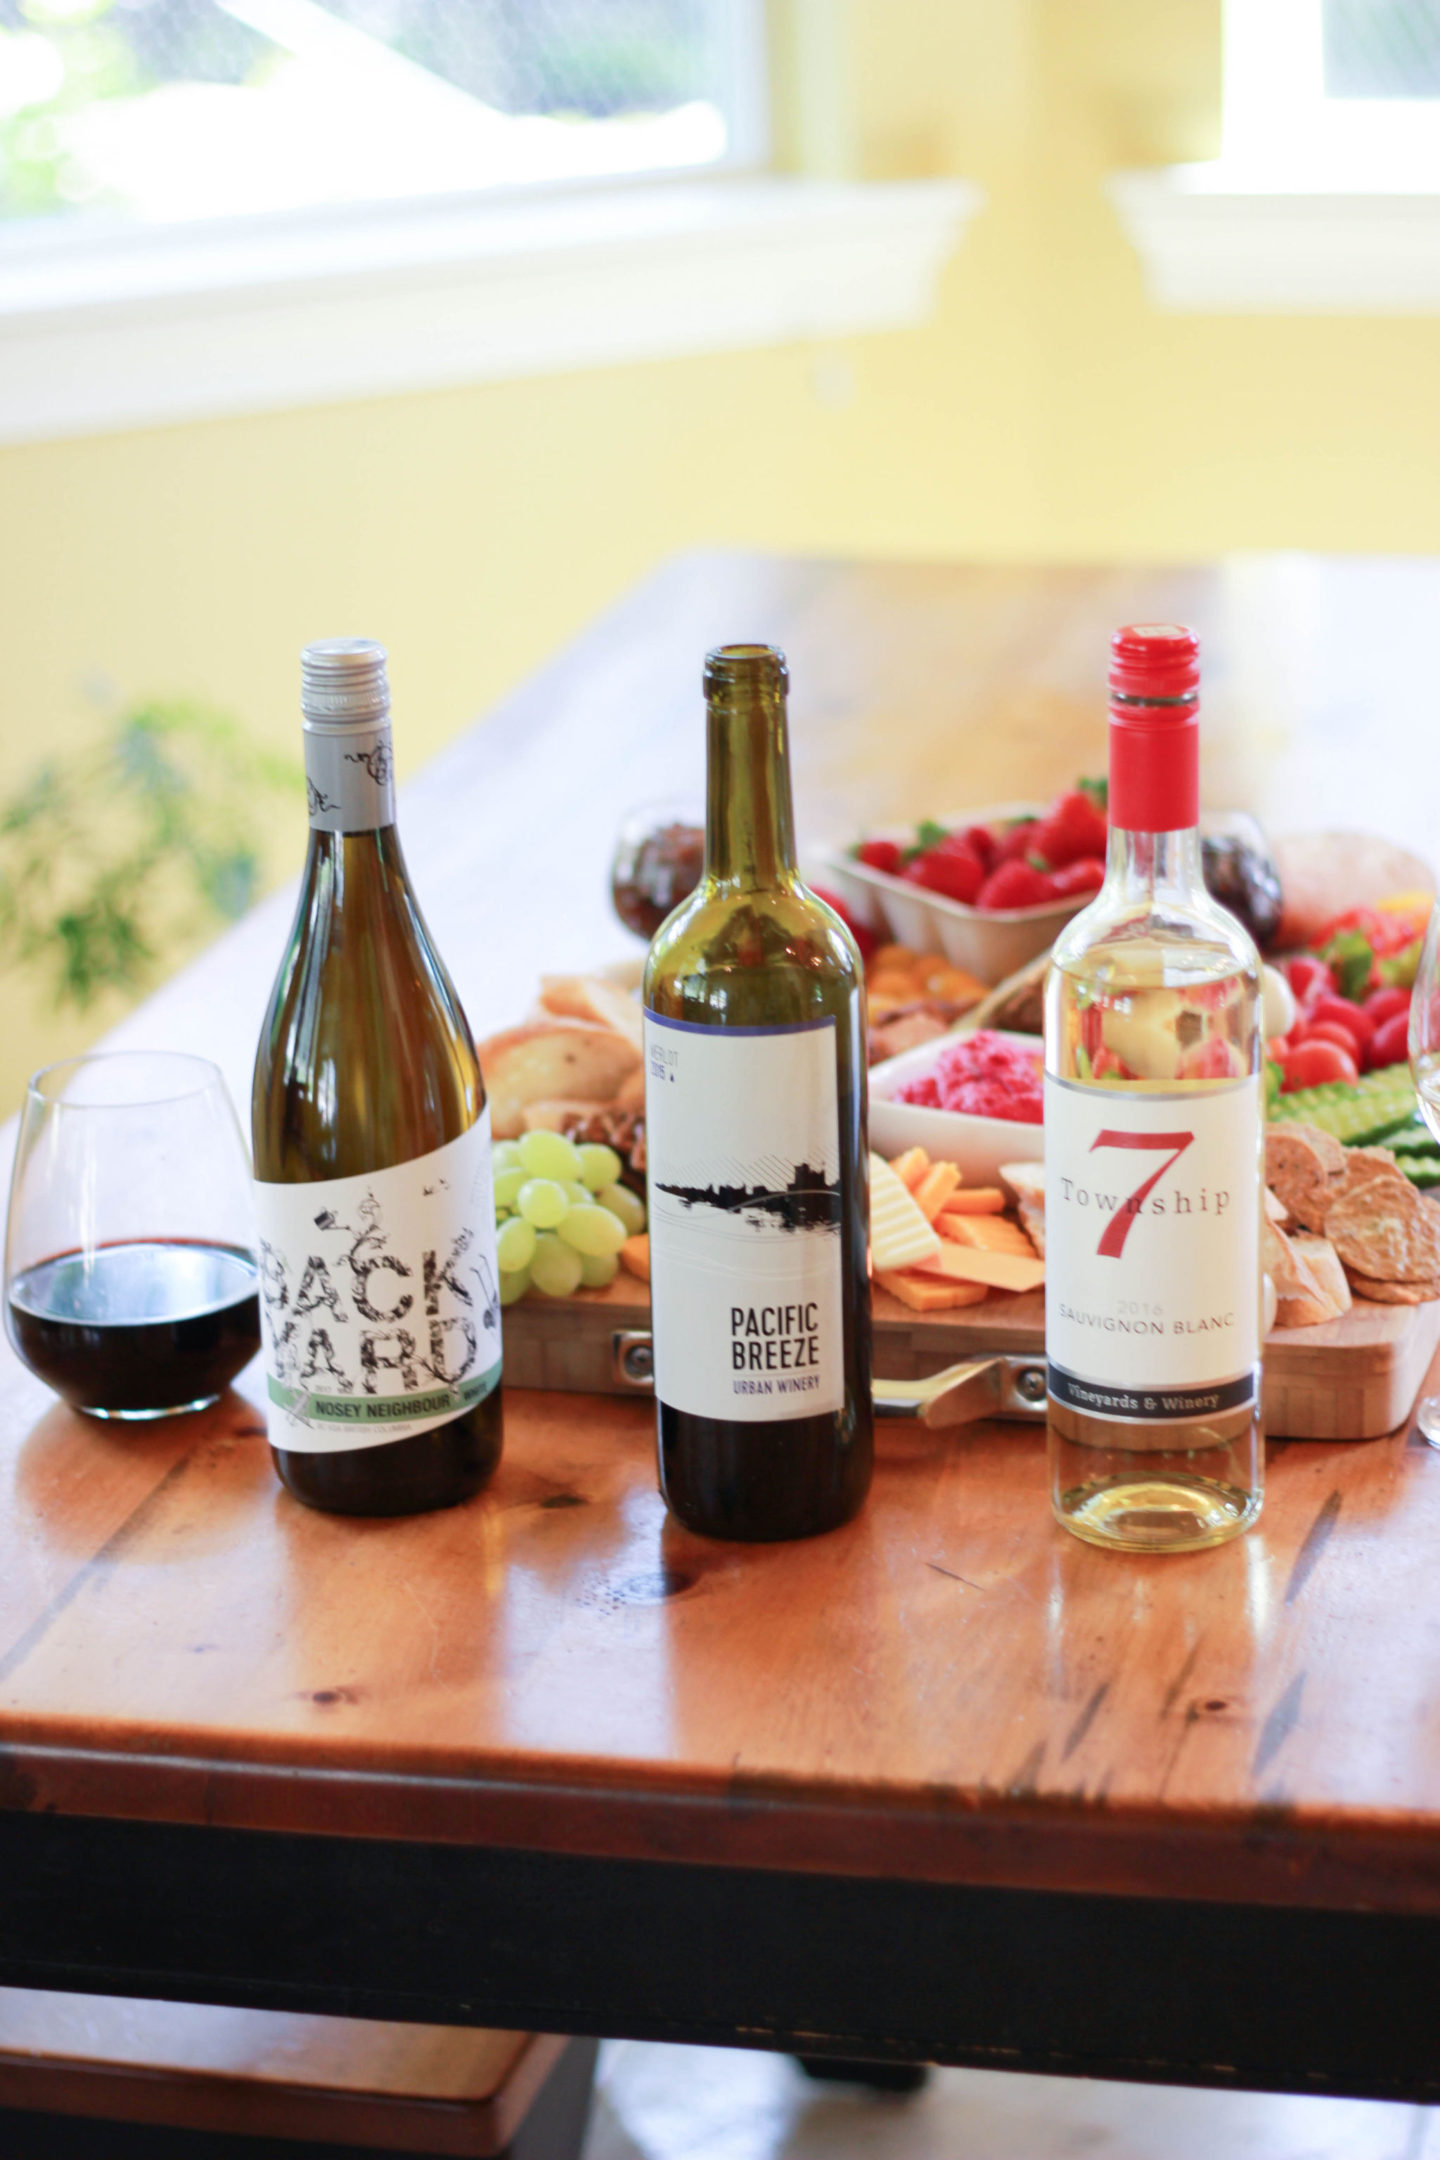 vegan-charcuterie-board-and-wines-to-pair-it-with